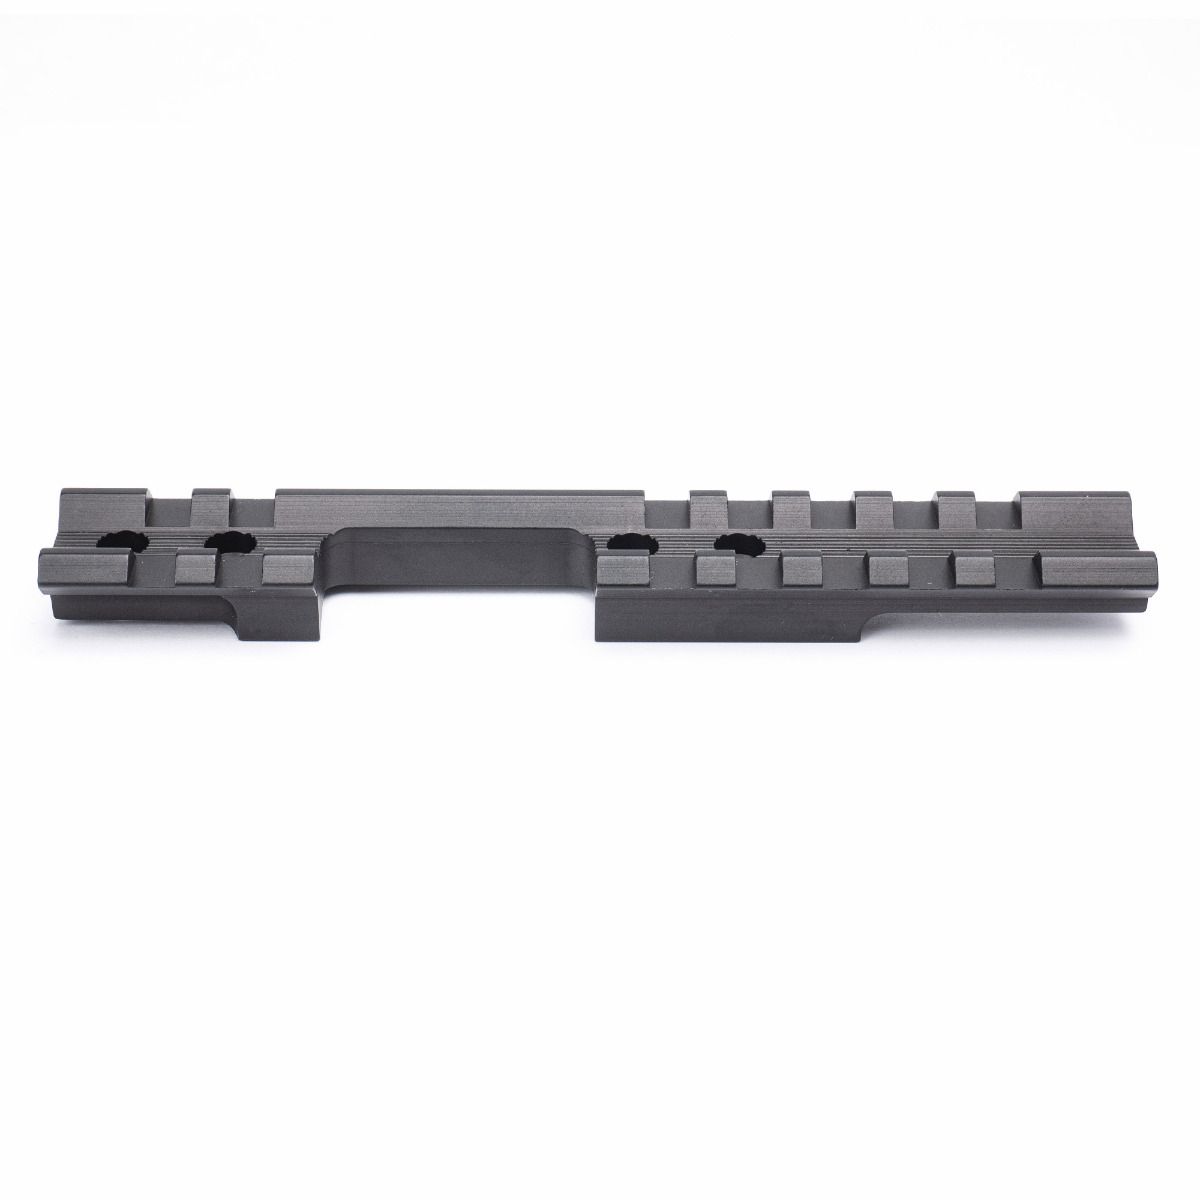 EGW Savage Rascal Picatinny Rail Scope Mount with Large Ejection Port Cutout